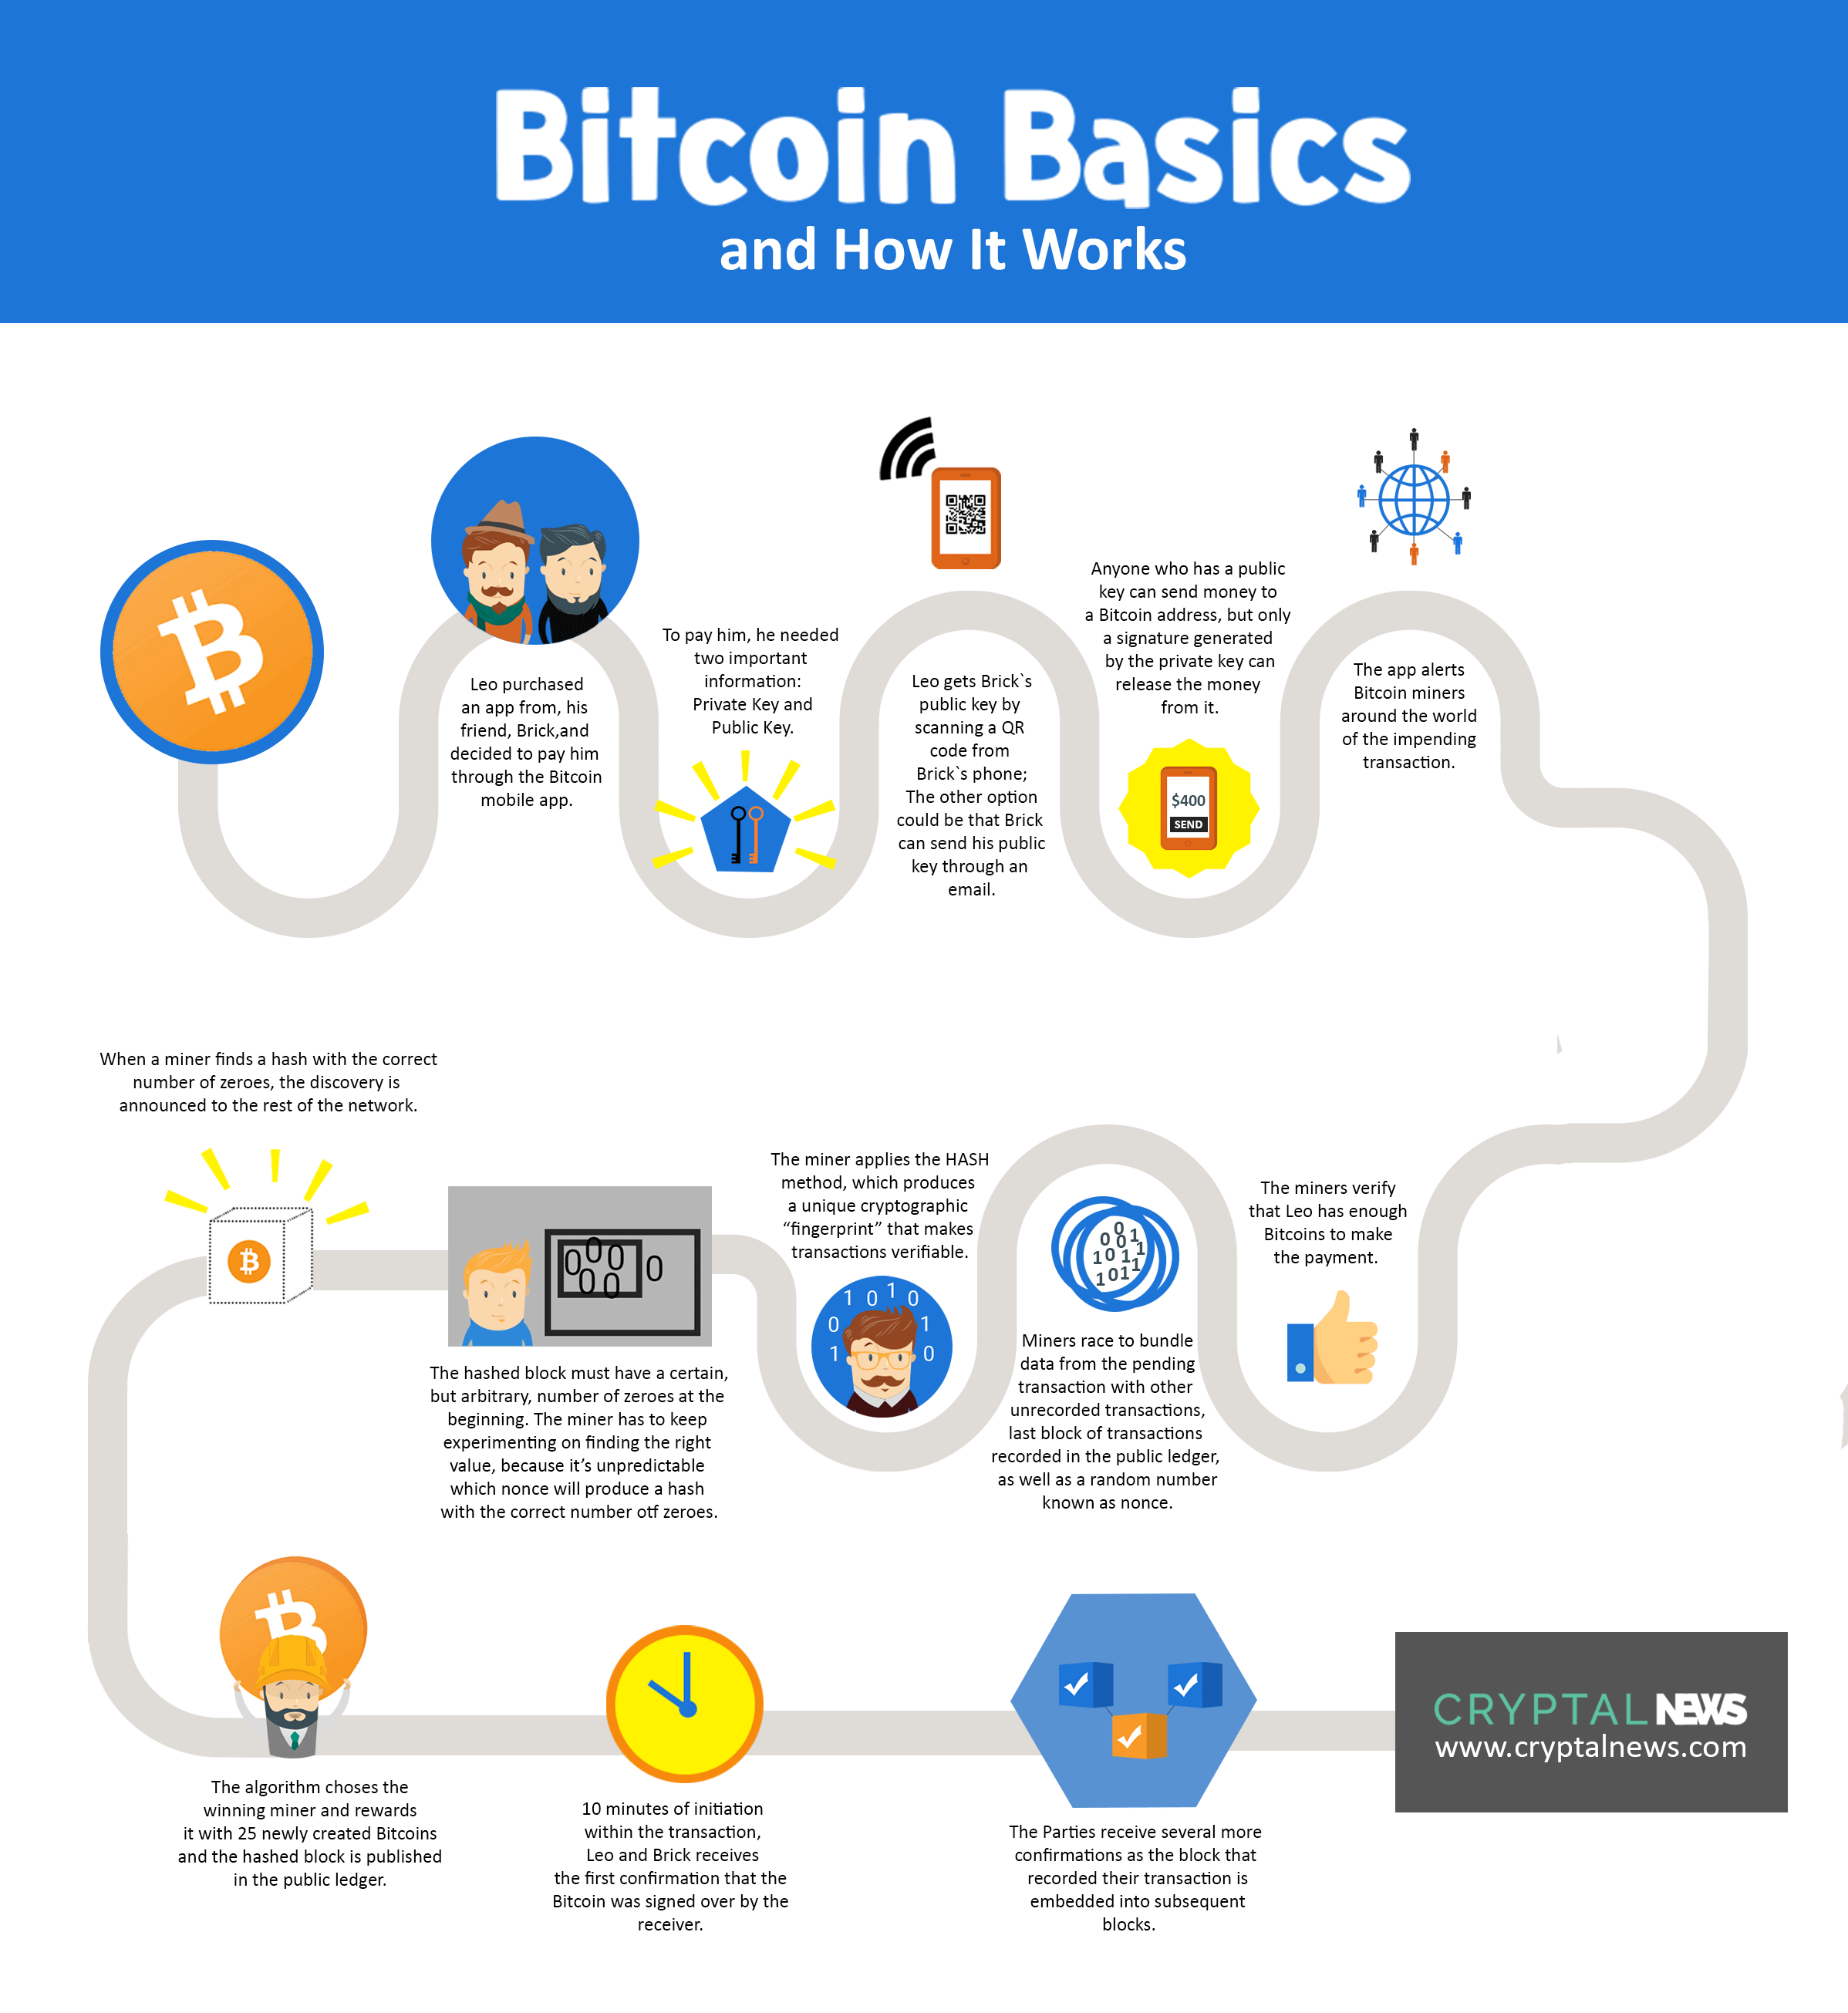 bitcoins how does it work